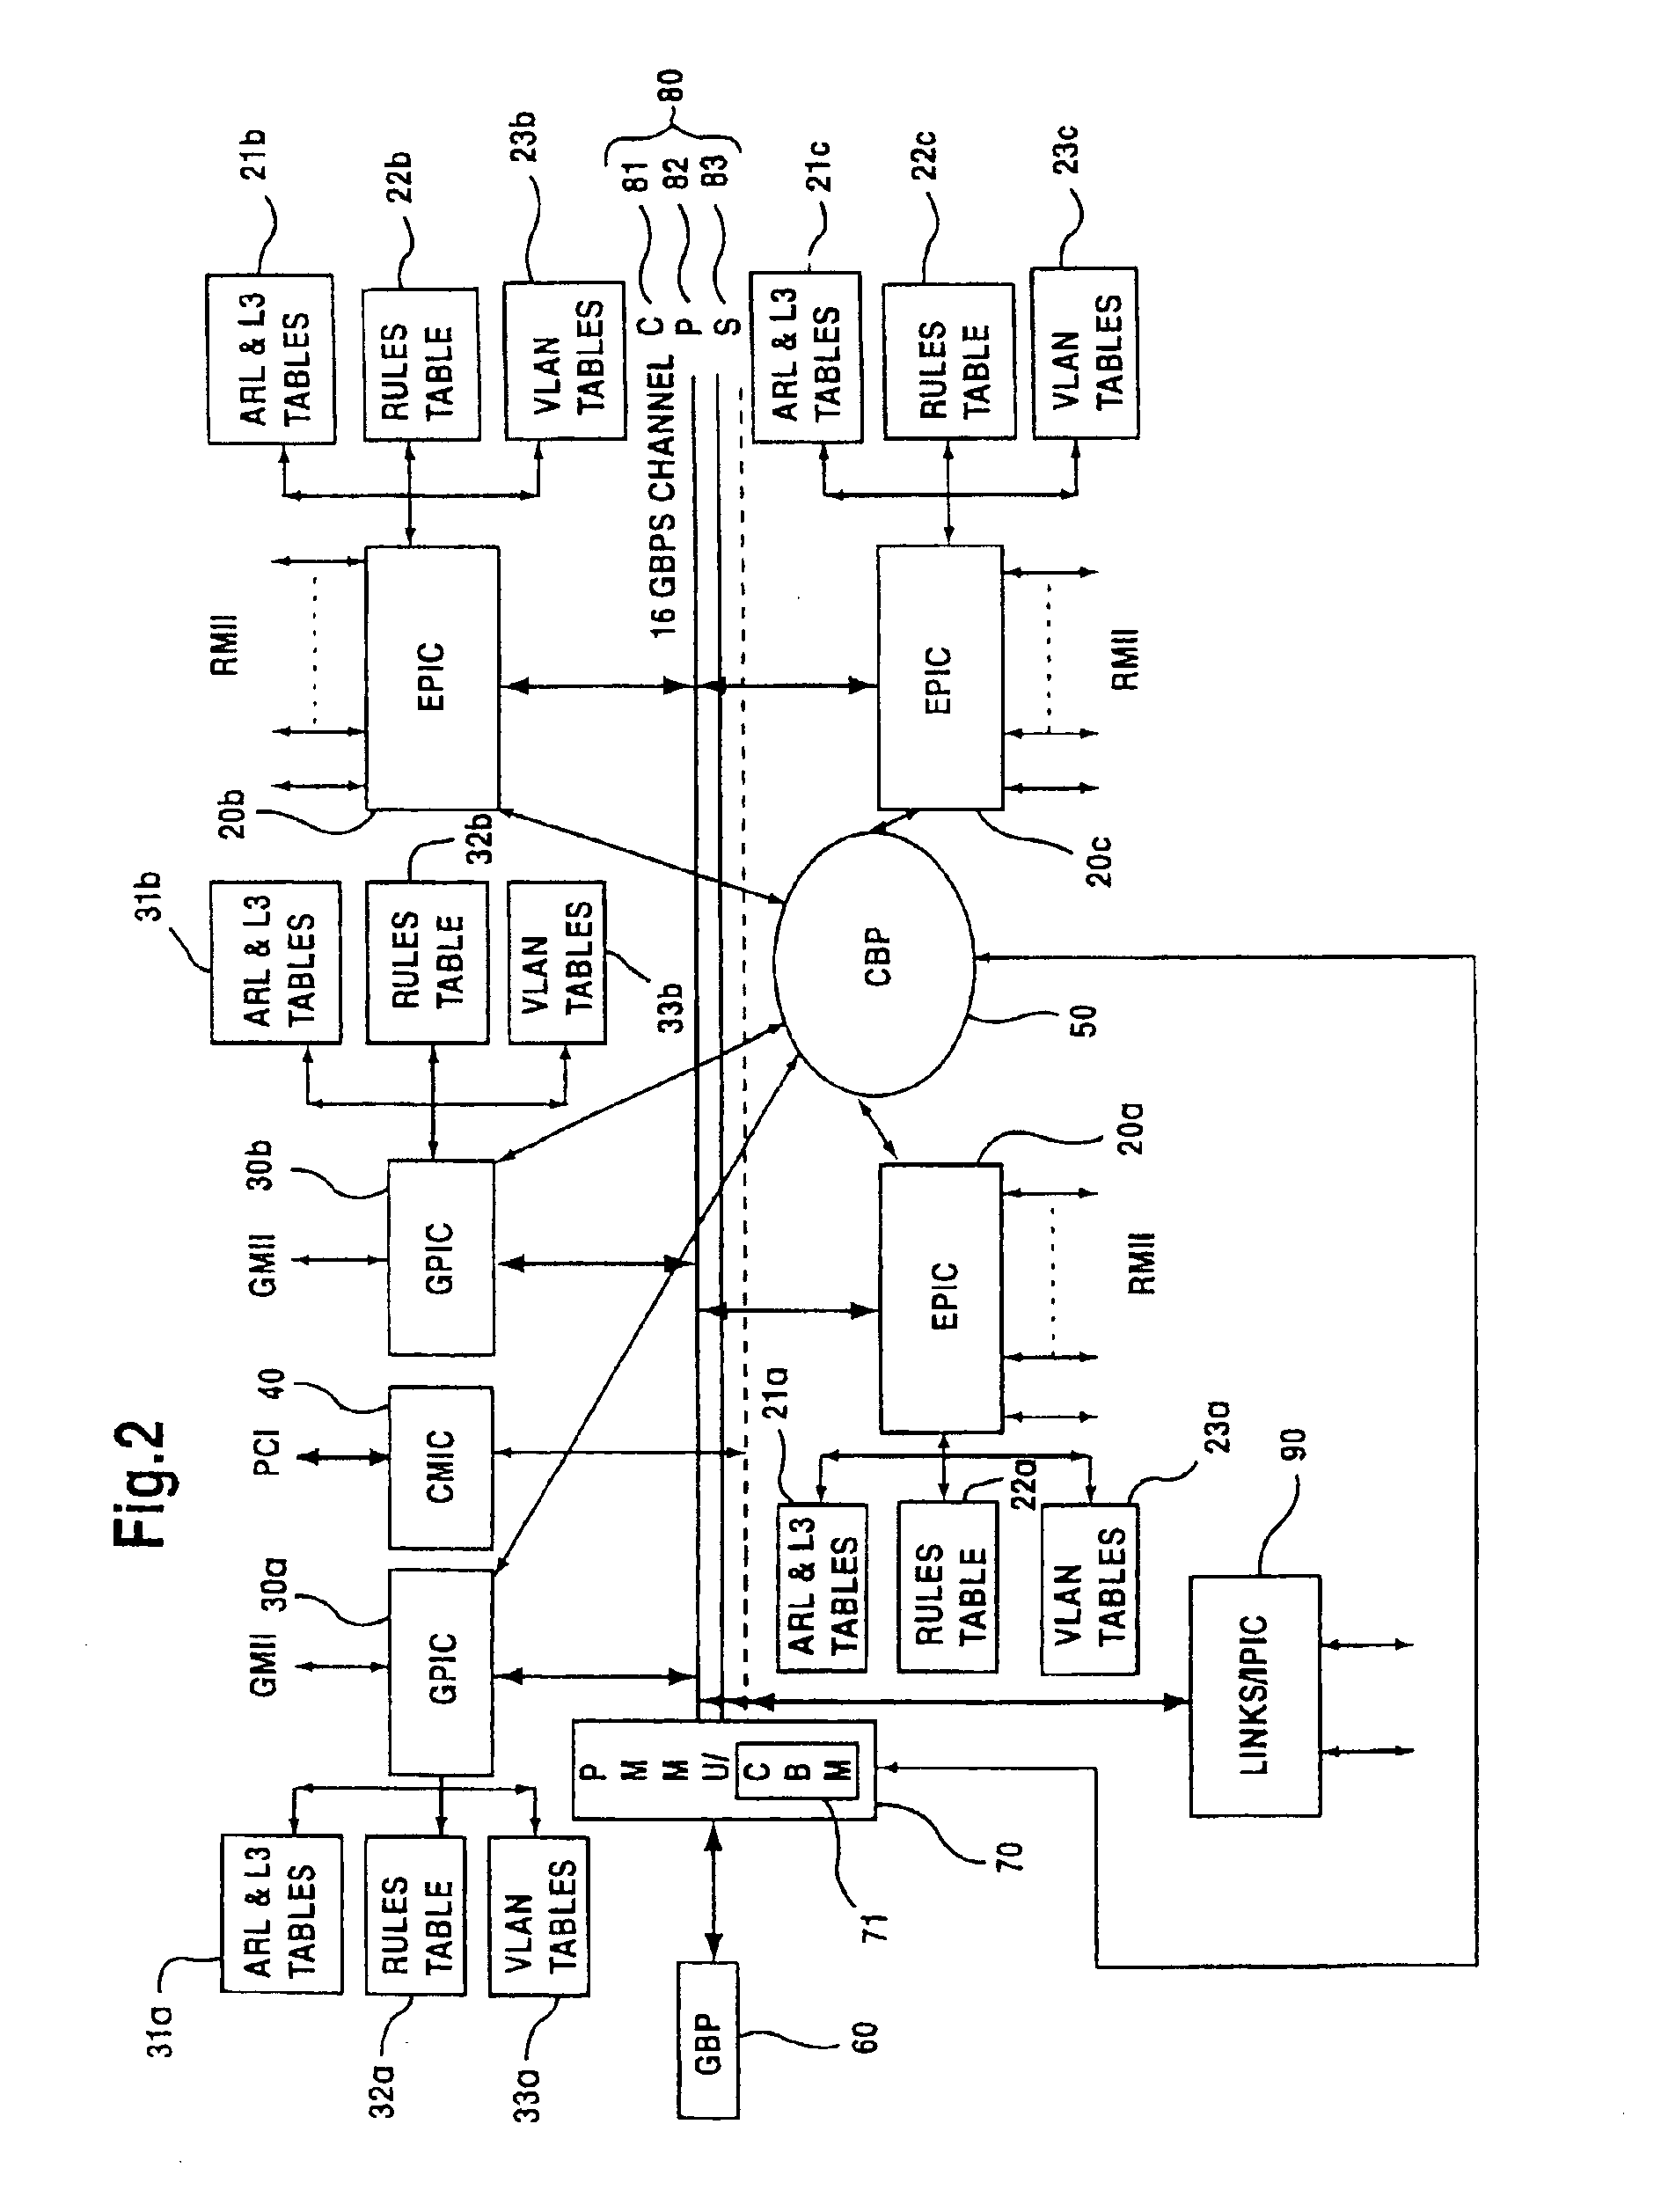 Fast flexible filter processor based architecture for a network device